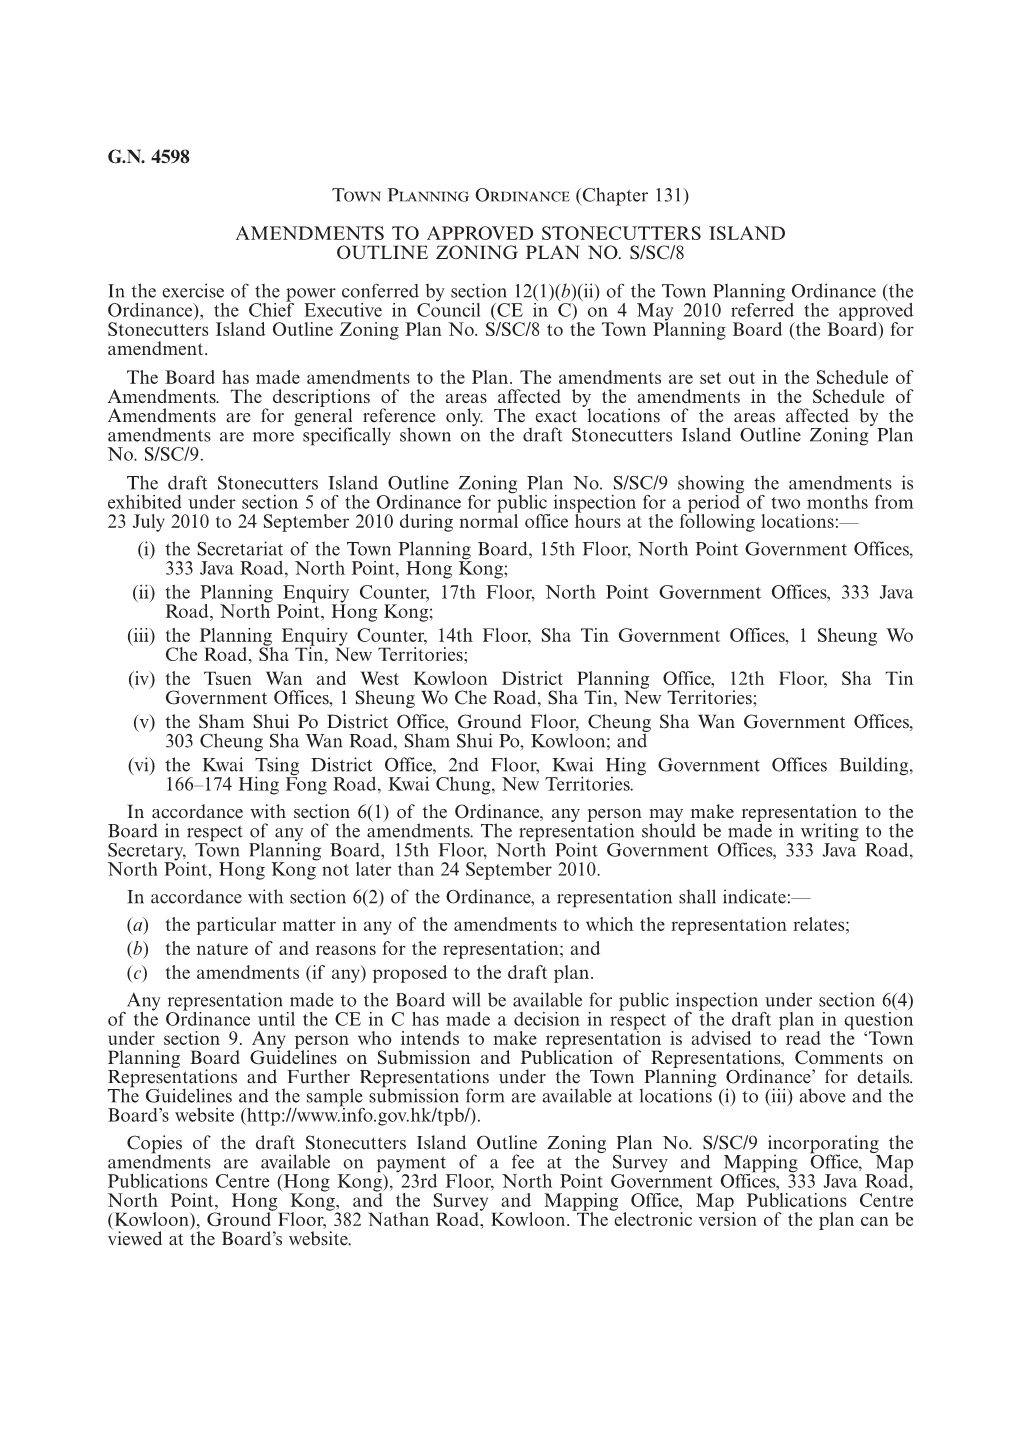 GN 4598 Town Planning Ordinance (Chapter 131)